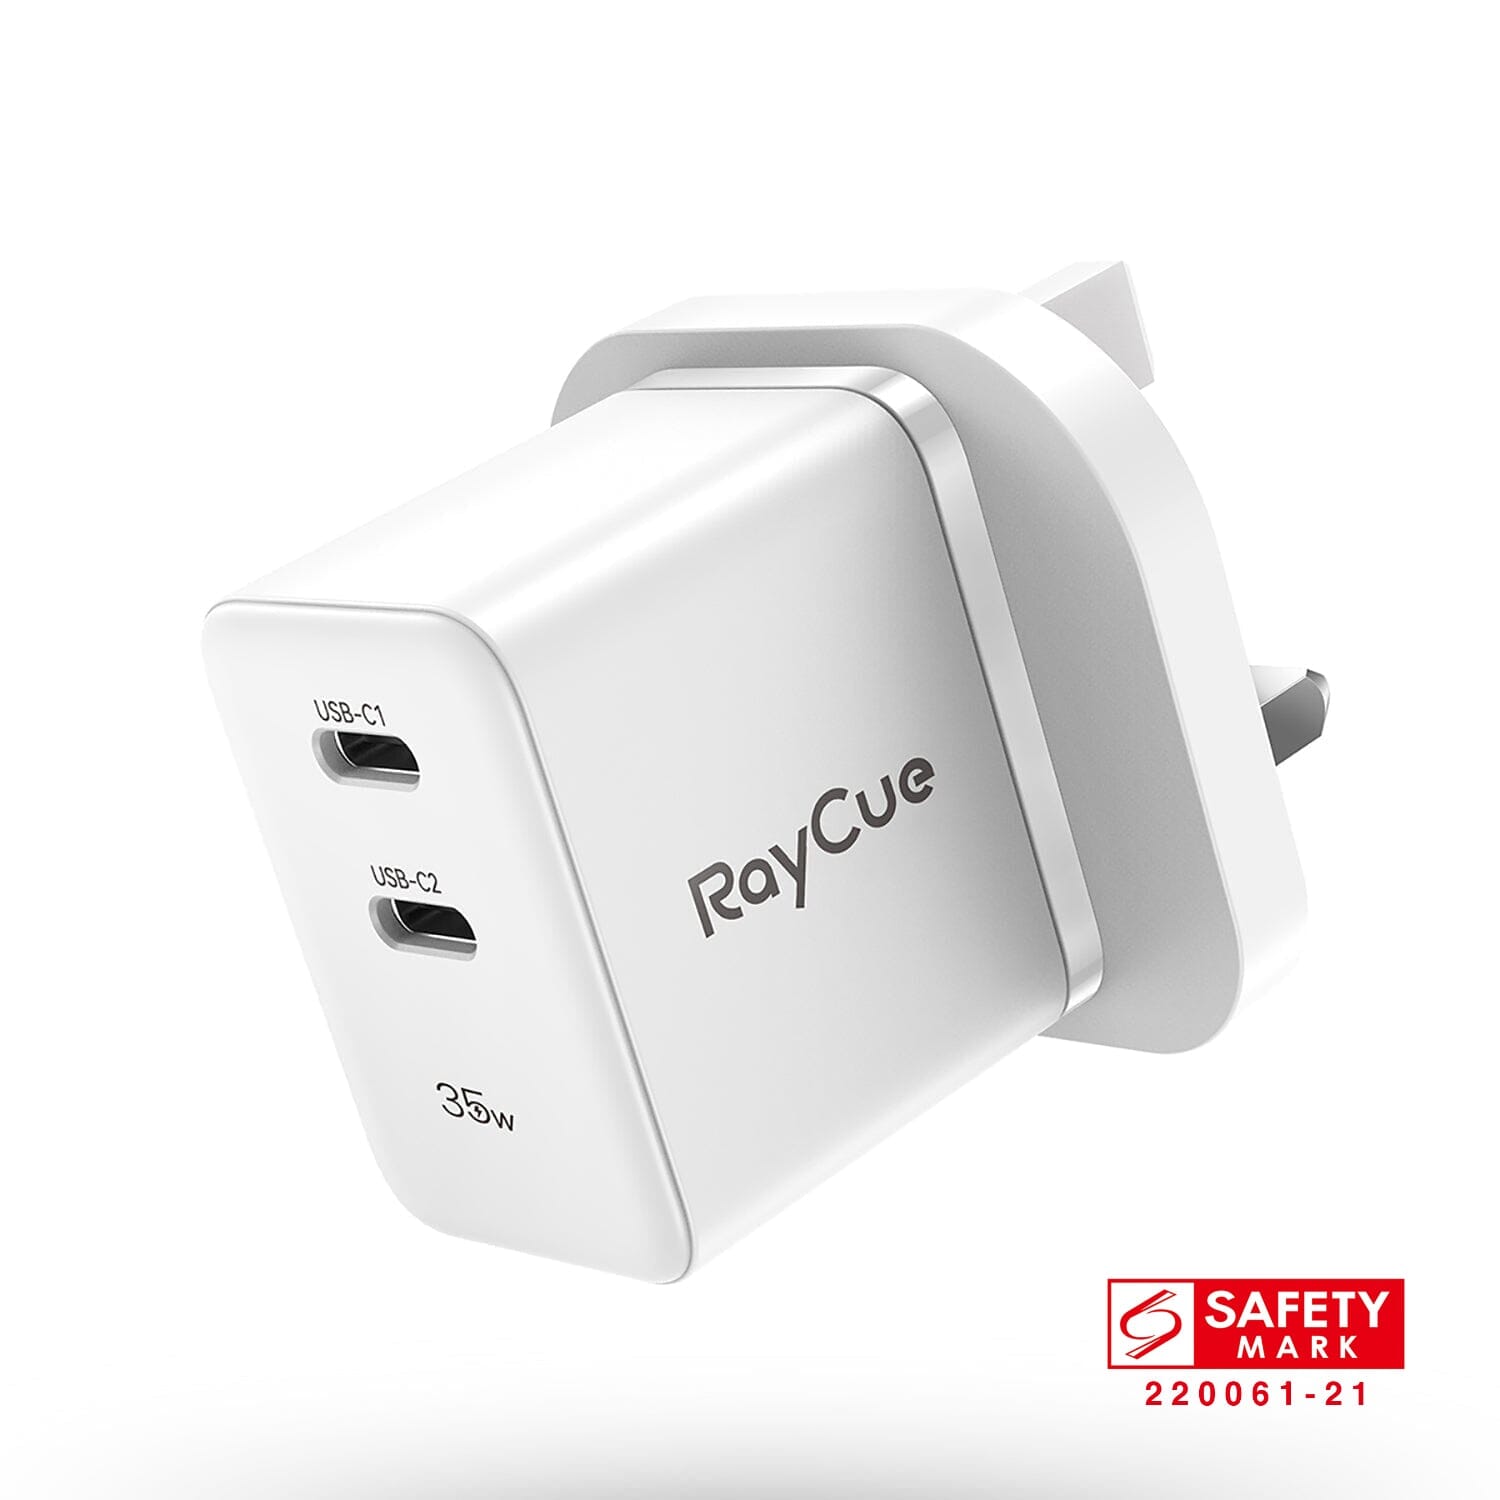 RayCue GaN PD35W 2-Port Wall Charger UK with Safety Mark Wall Charger RayCue 